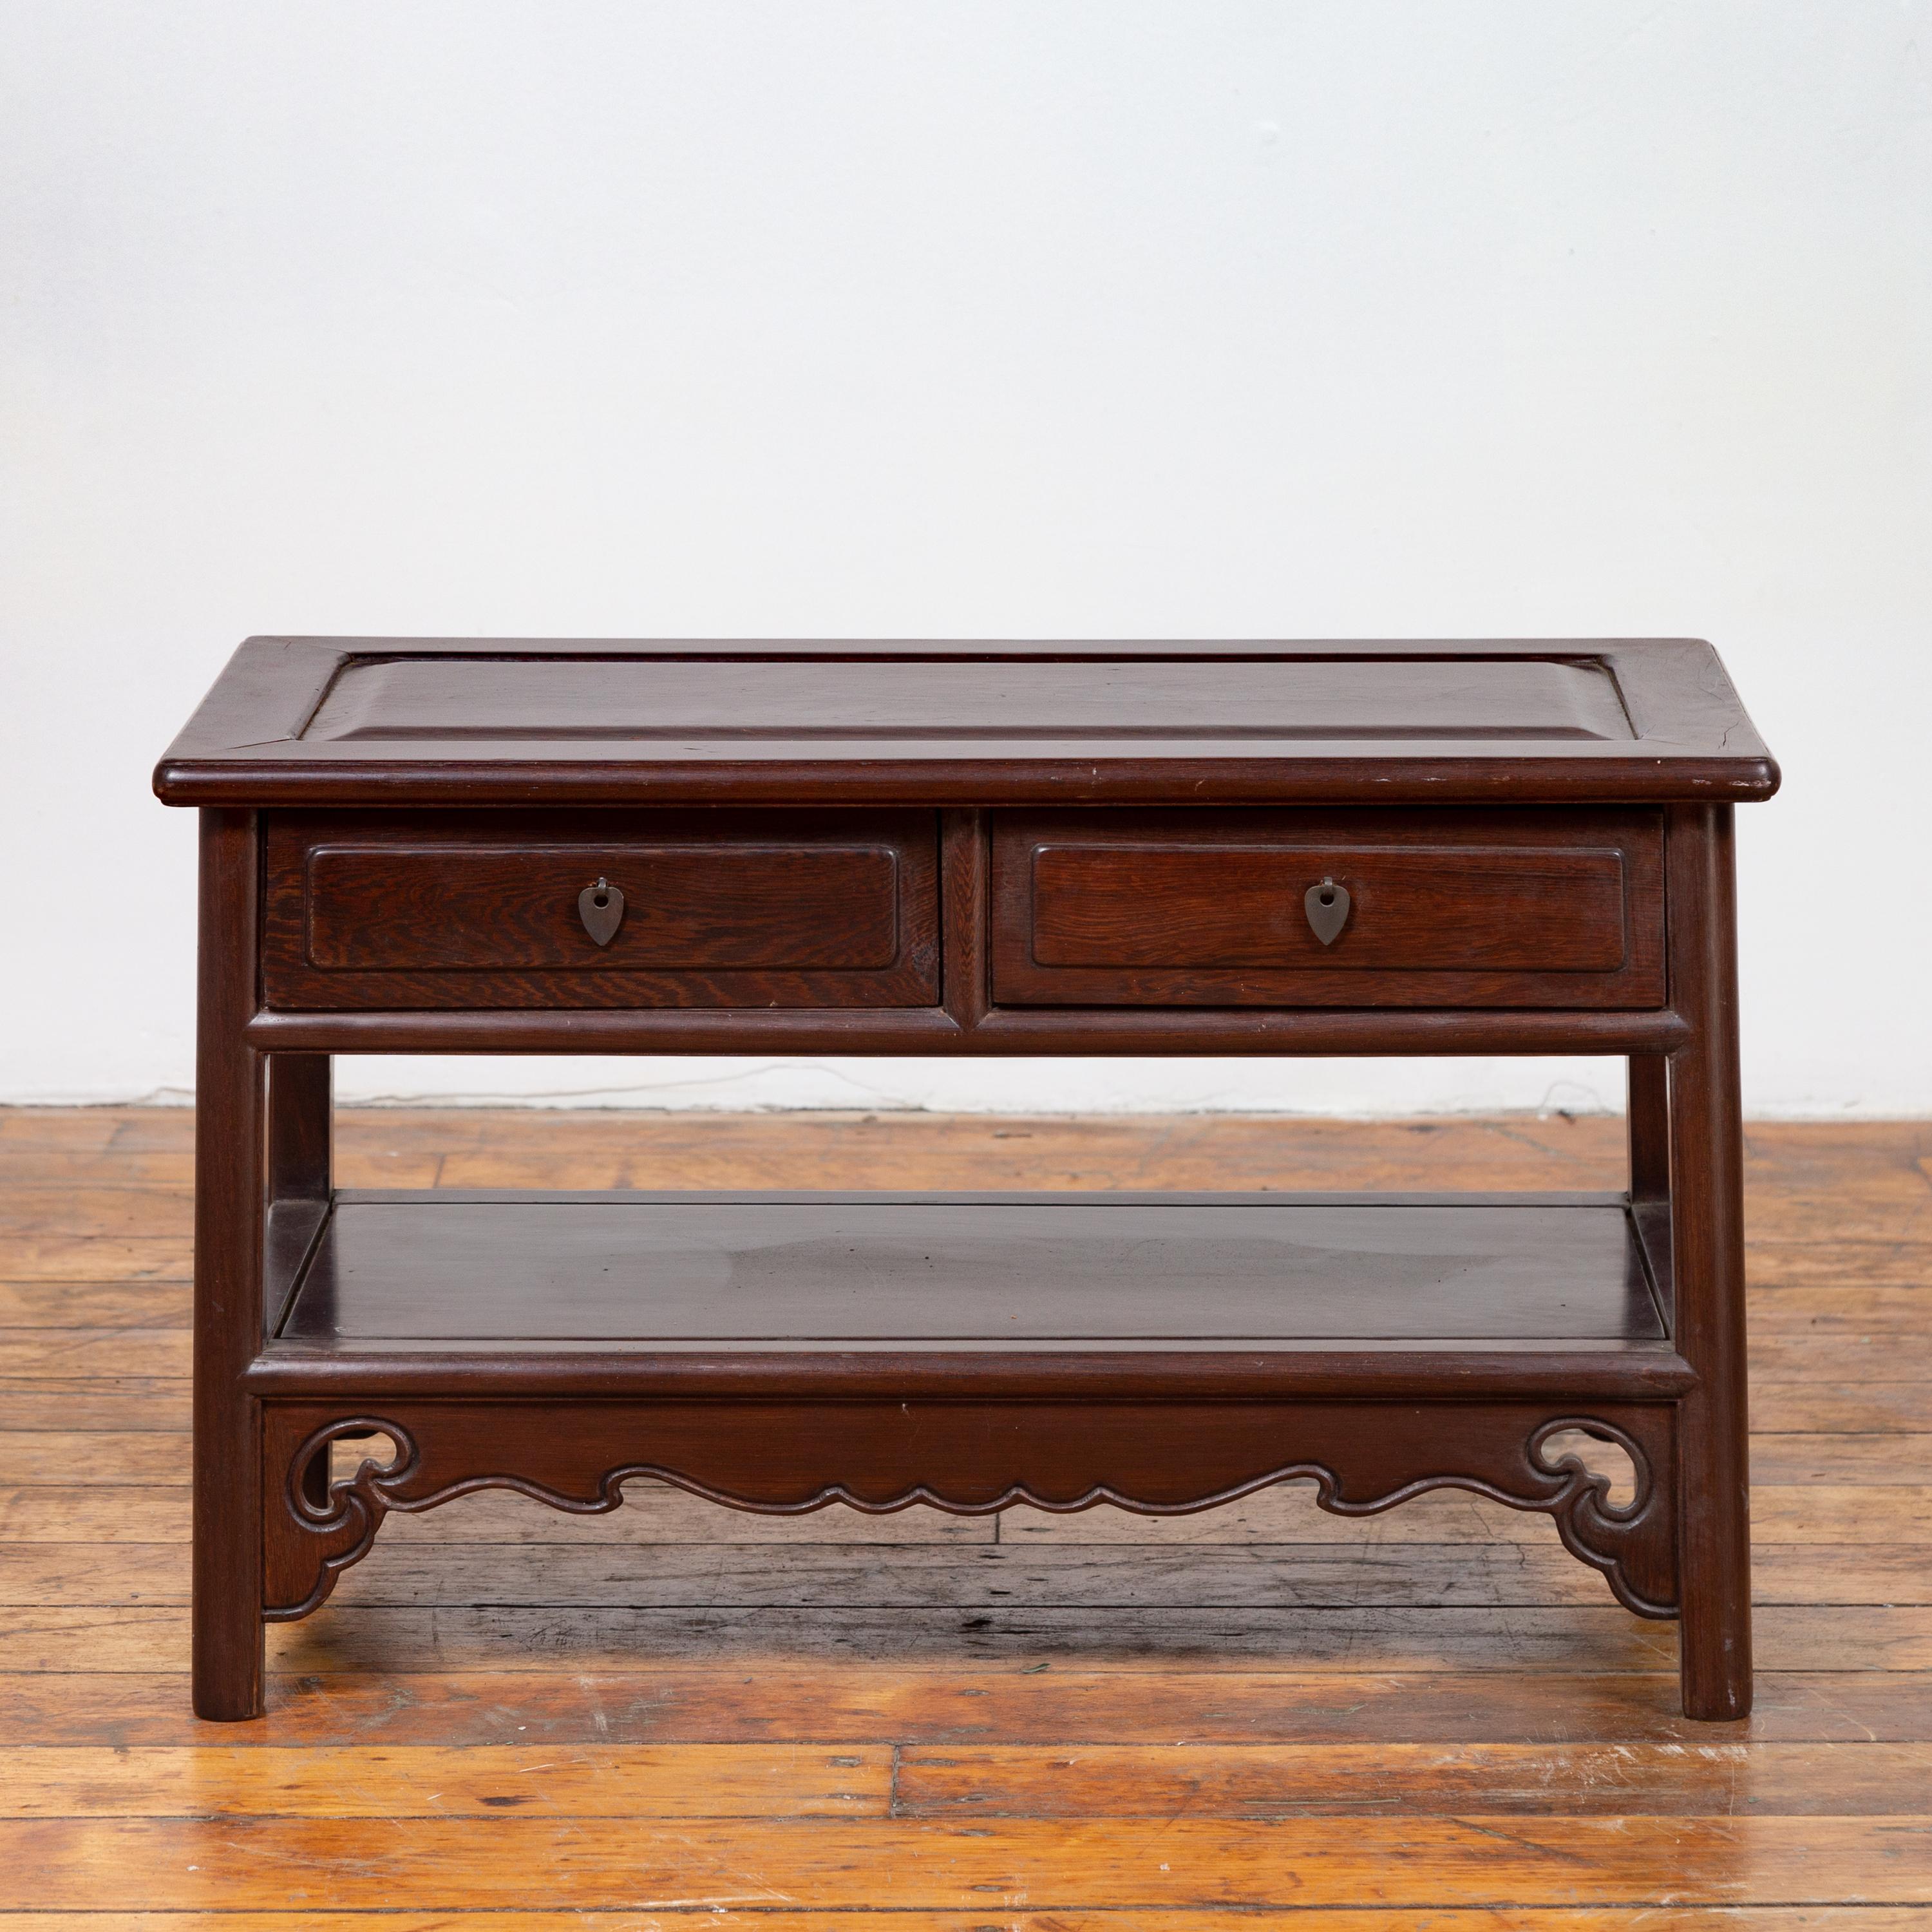 A Chinese vintage rosewood low side table from the mid-20th century, with two drawers, shelf and scalloped skirt. Born in China during the midcentury period, this elegant rosewood table features a rectangular top with raised central board, sitting